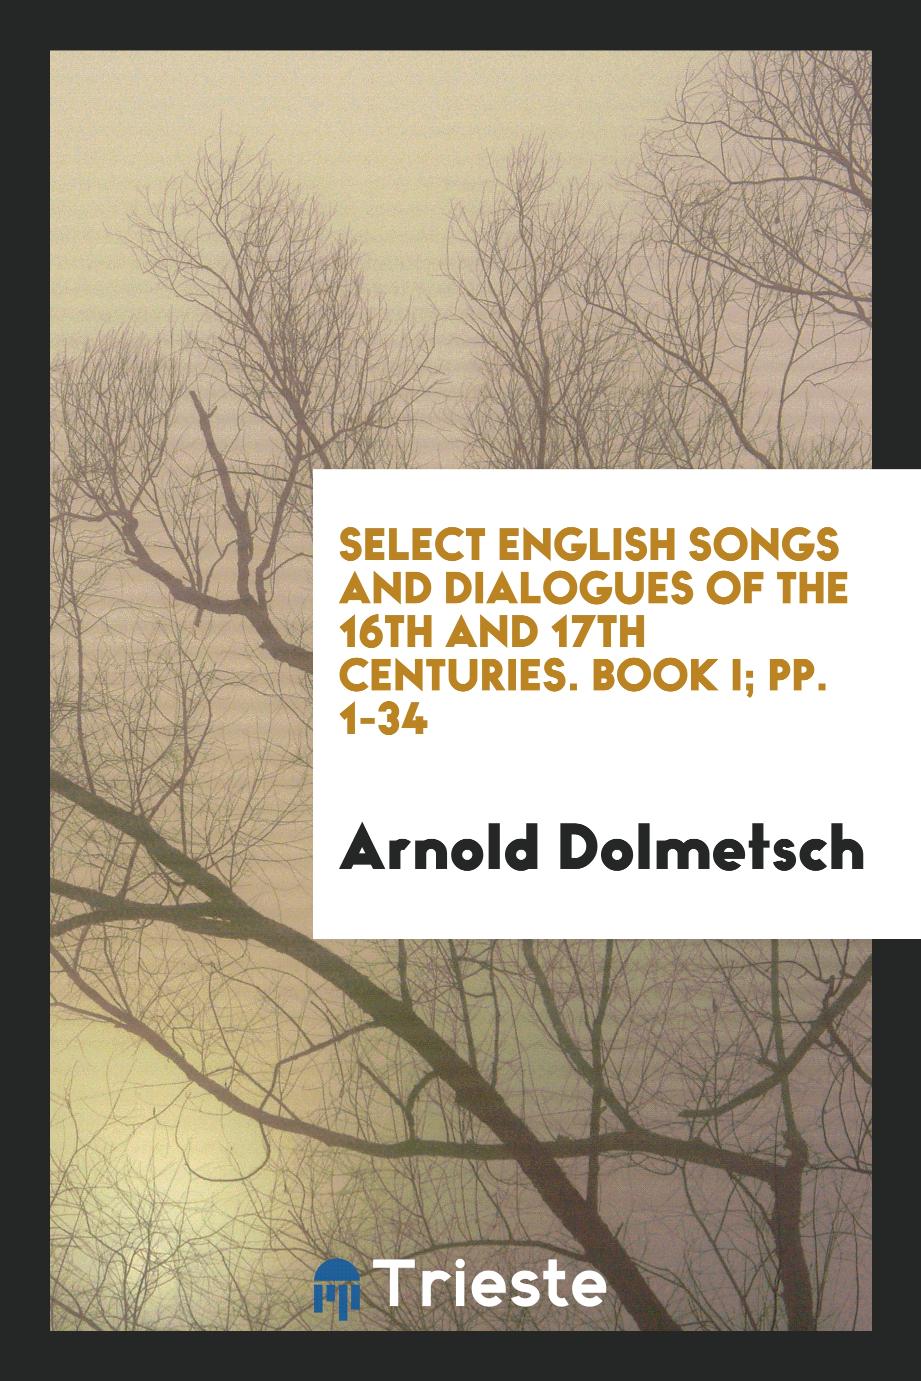 Select English songs and dialogues of the 16th and 17th centuries. Book I; pp. 1-34